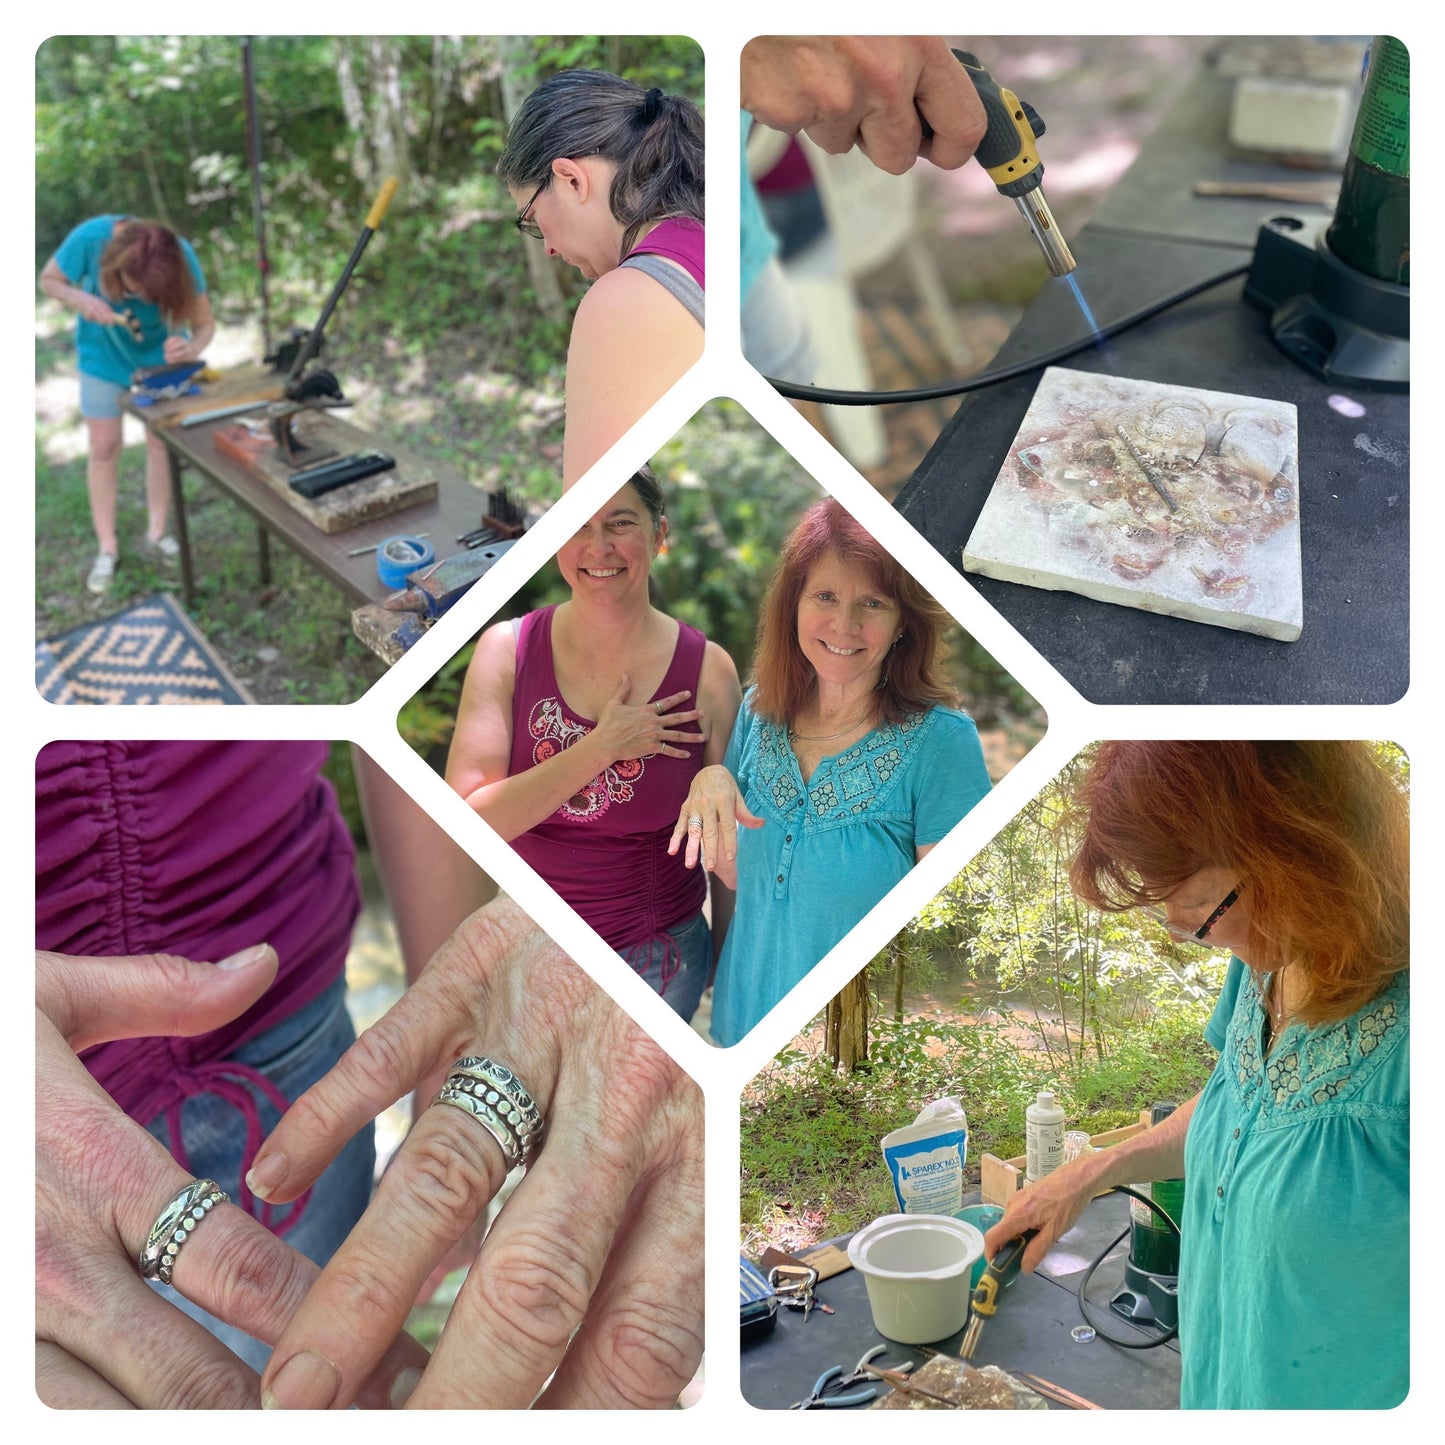 Intro To Silversmithing Class: Textured Silver Bands: Saturday September 30th 12-2:30